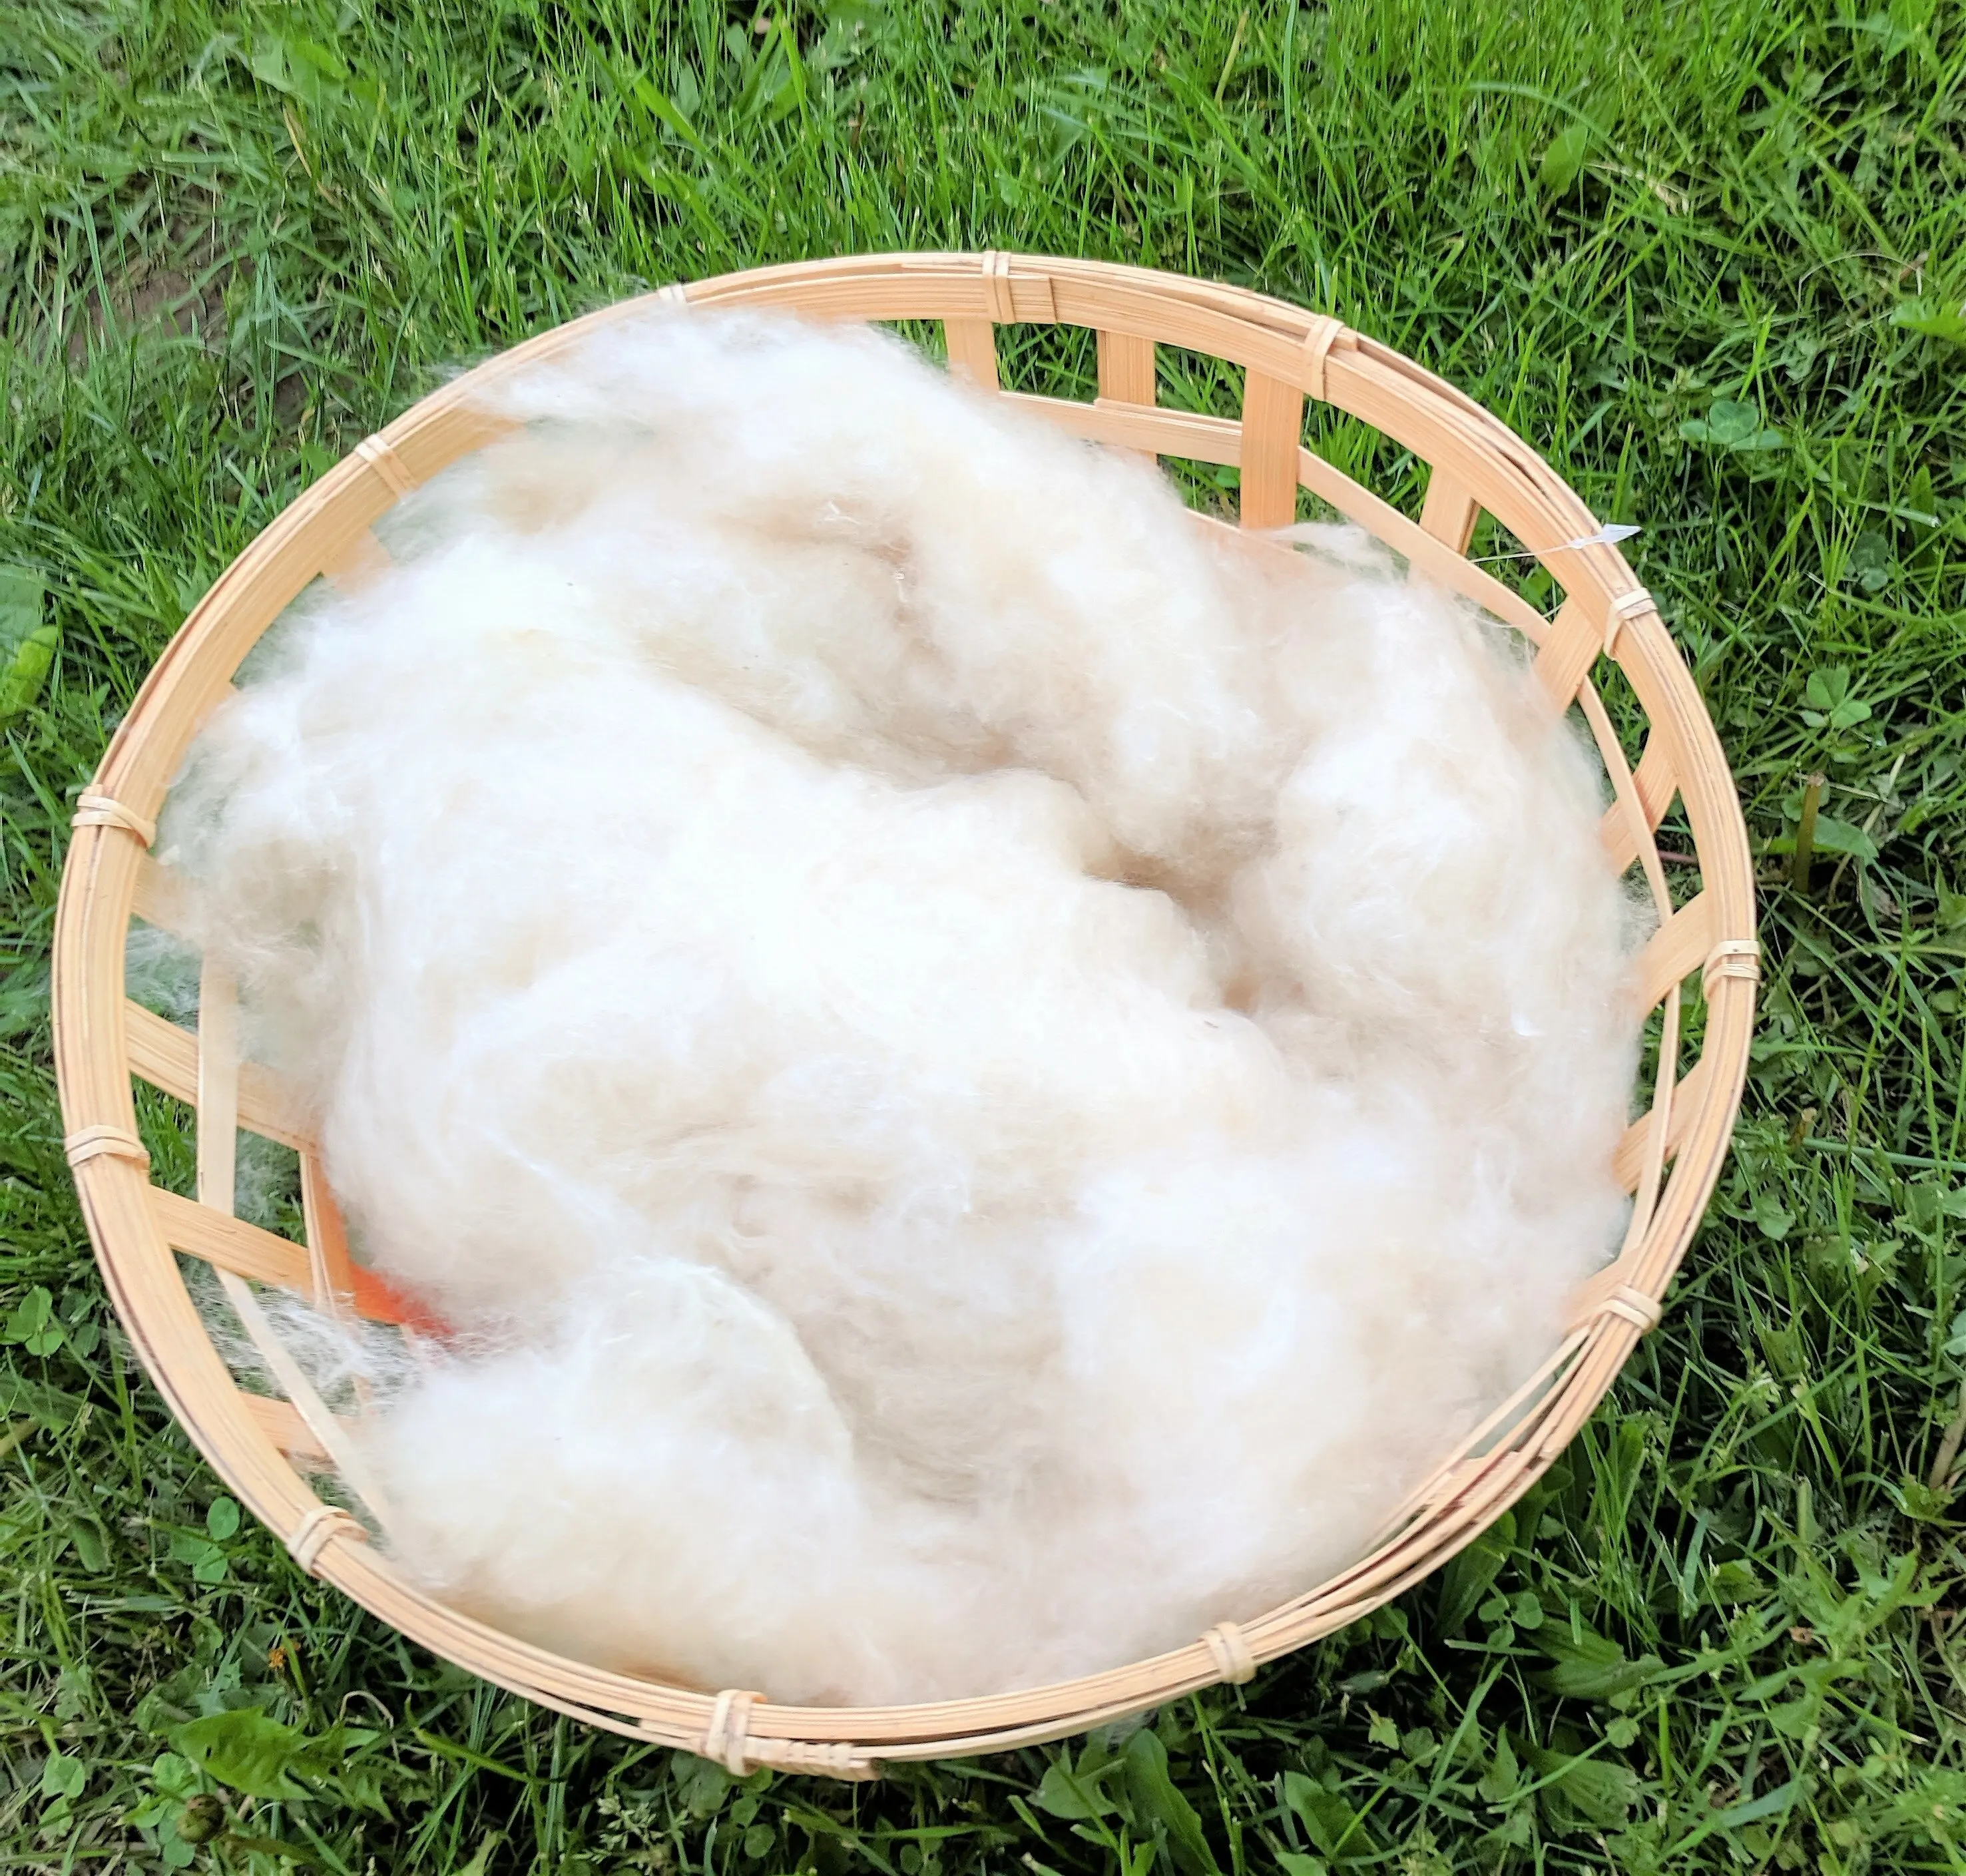 100% Natural Gon Cotton from cotton fruit, used to make teddy bears